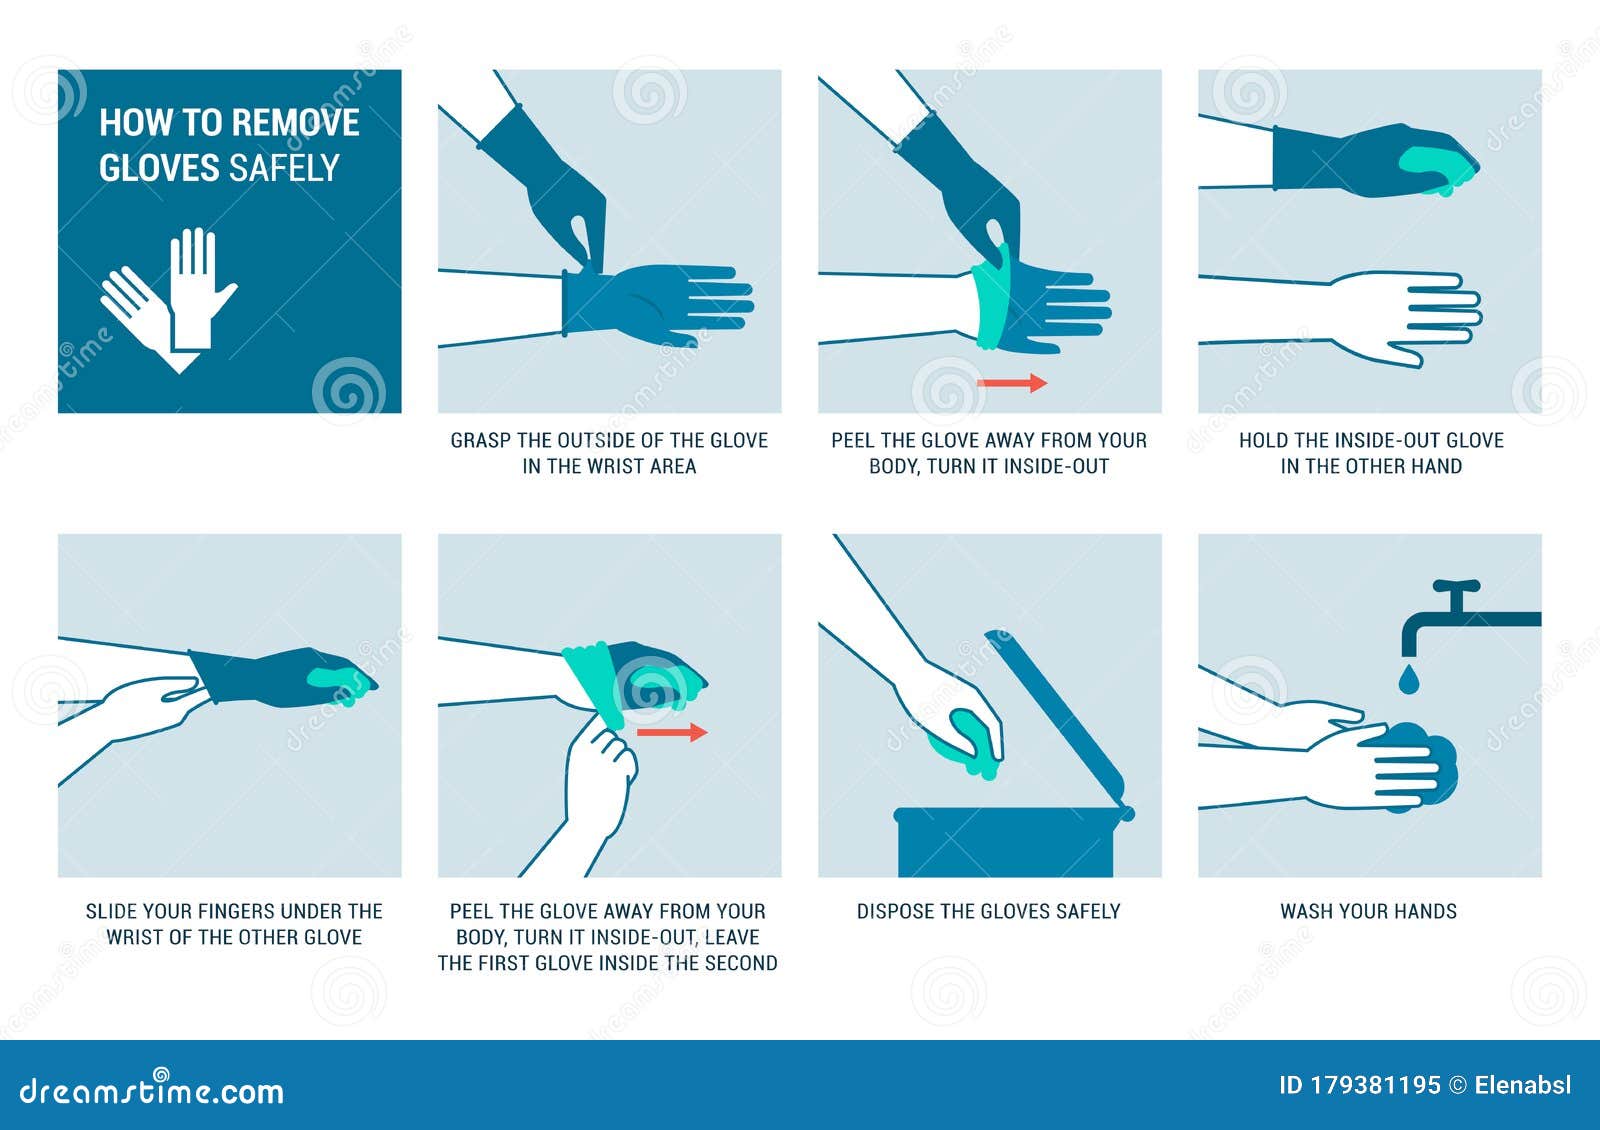 how to remove gloves safely